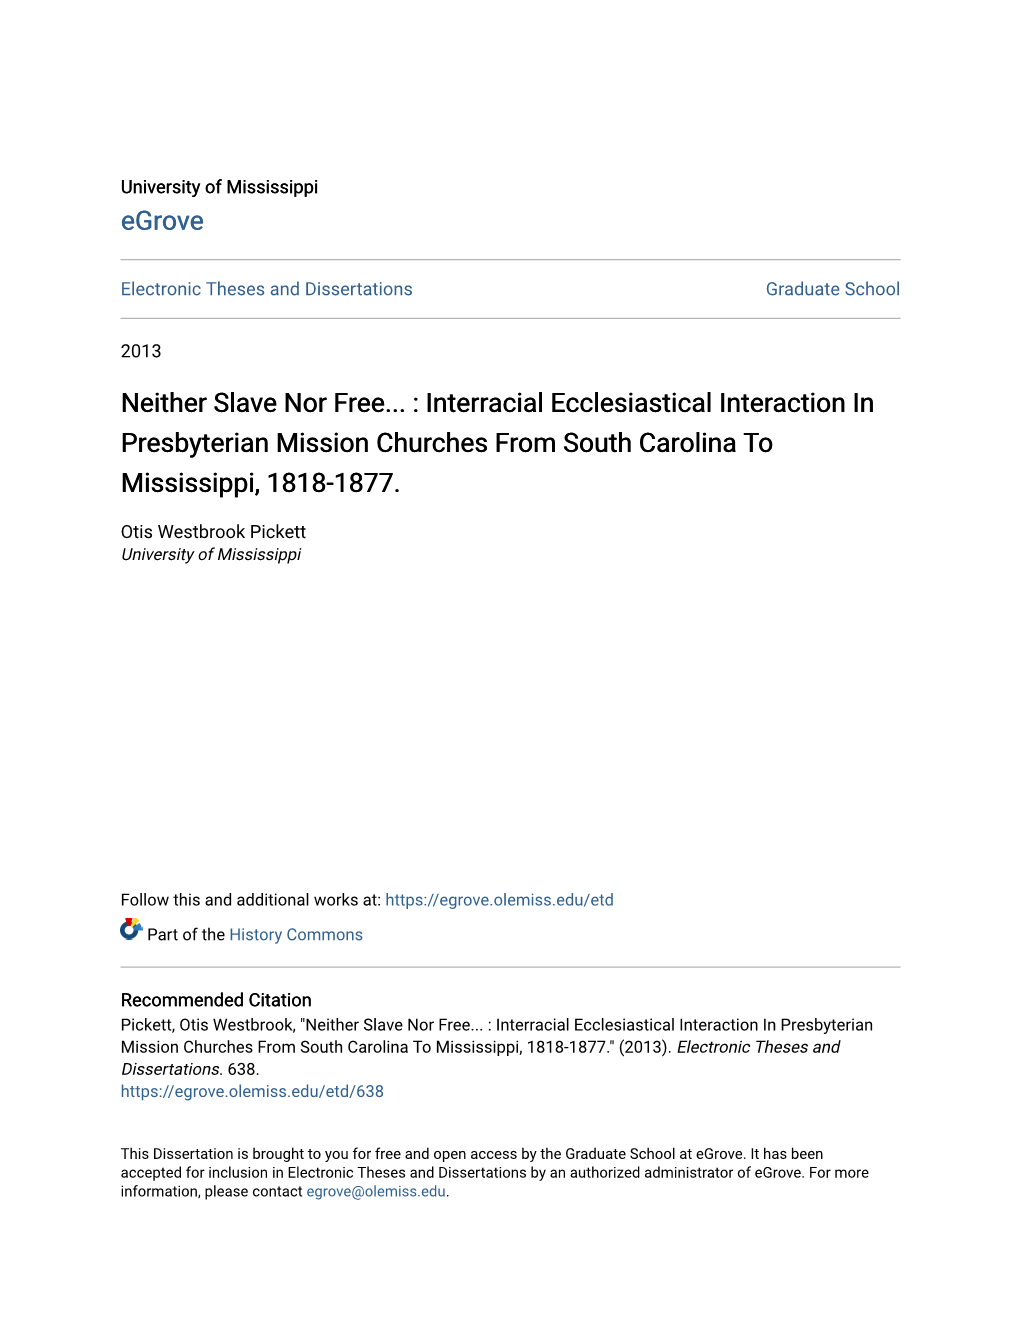 Neither Slave Nor Free... : Interracial Ecclesiastical Interaction in Presbyterian Mission Churches from South Carolina to Mississippi, 1818-1877